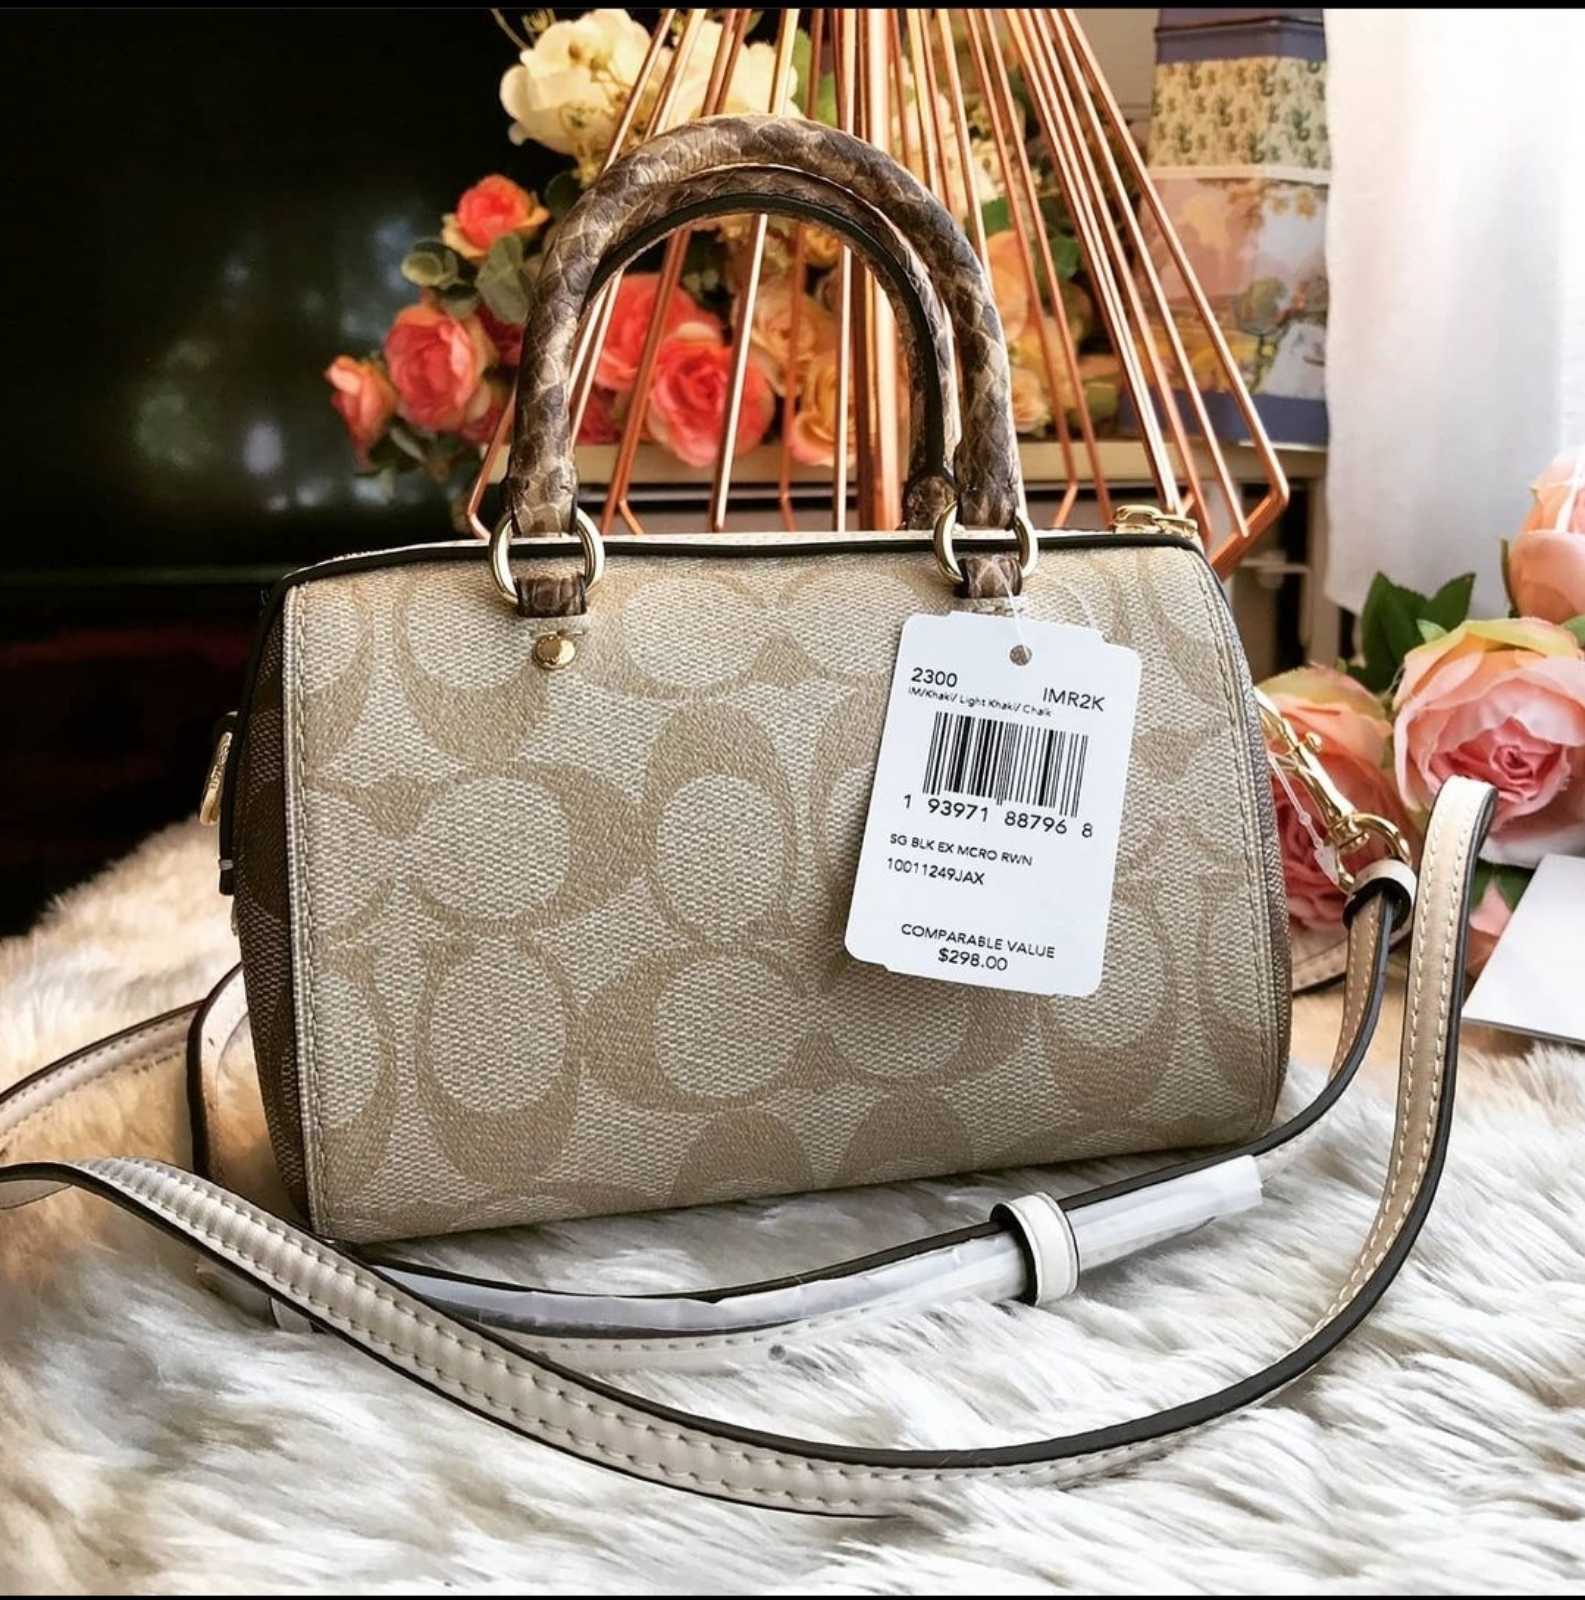 Coach 2300 Micro Rowan Crossbody in Khaki / Light Khaki Signature Coated  Canvas Chalk Smooth Leather and Snake-embossed Leather - Women's Bag